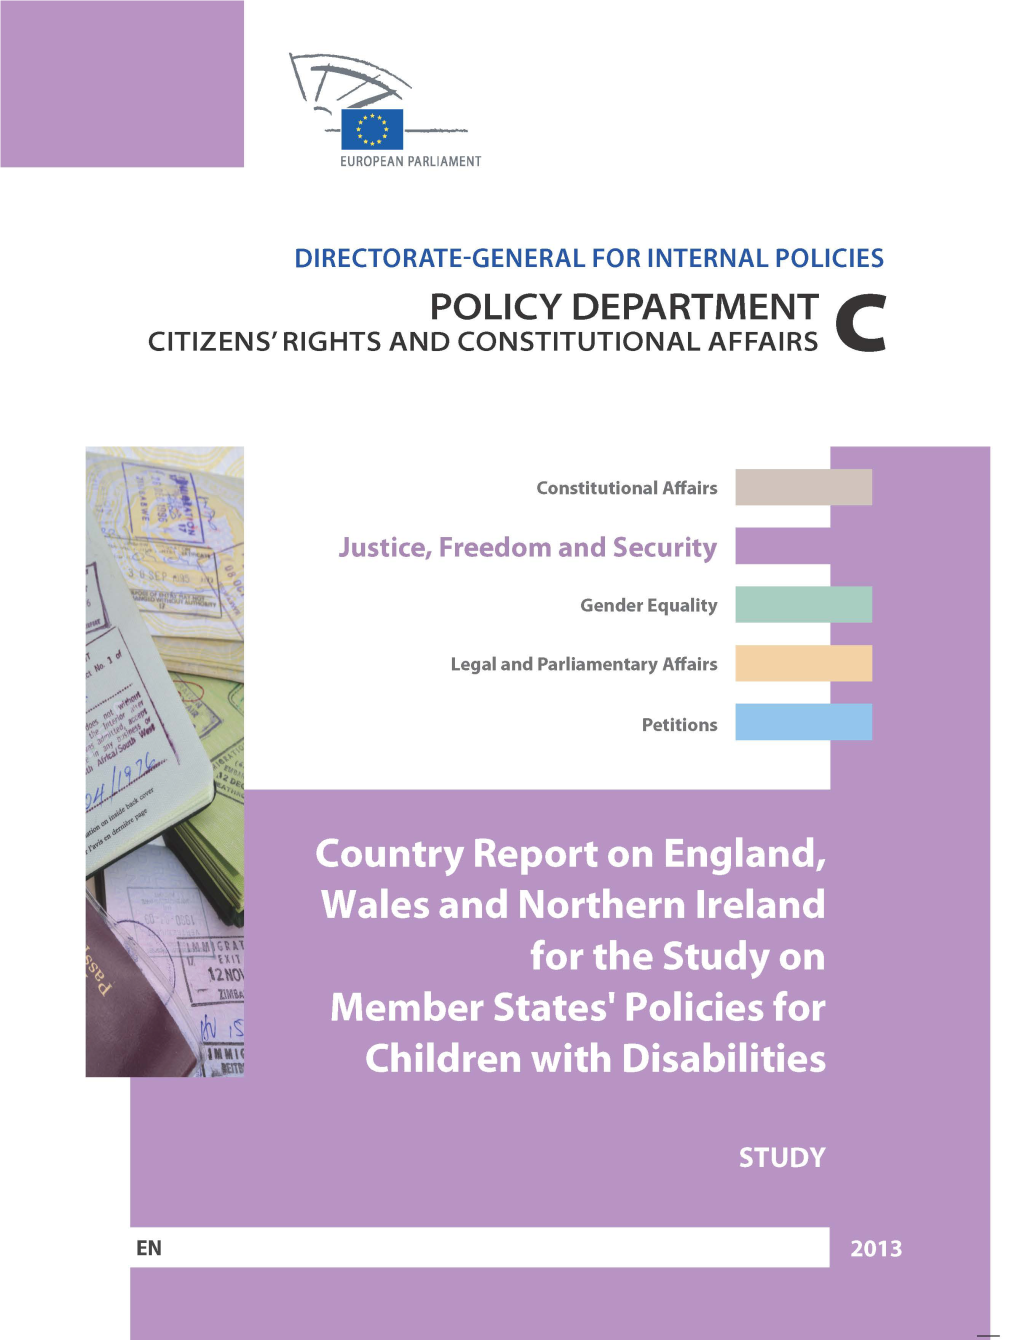 Country Report on England, Wales and Northern Ireland for the Study on Member States' Policies for Children with Disabilities ______